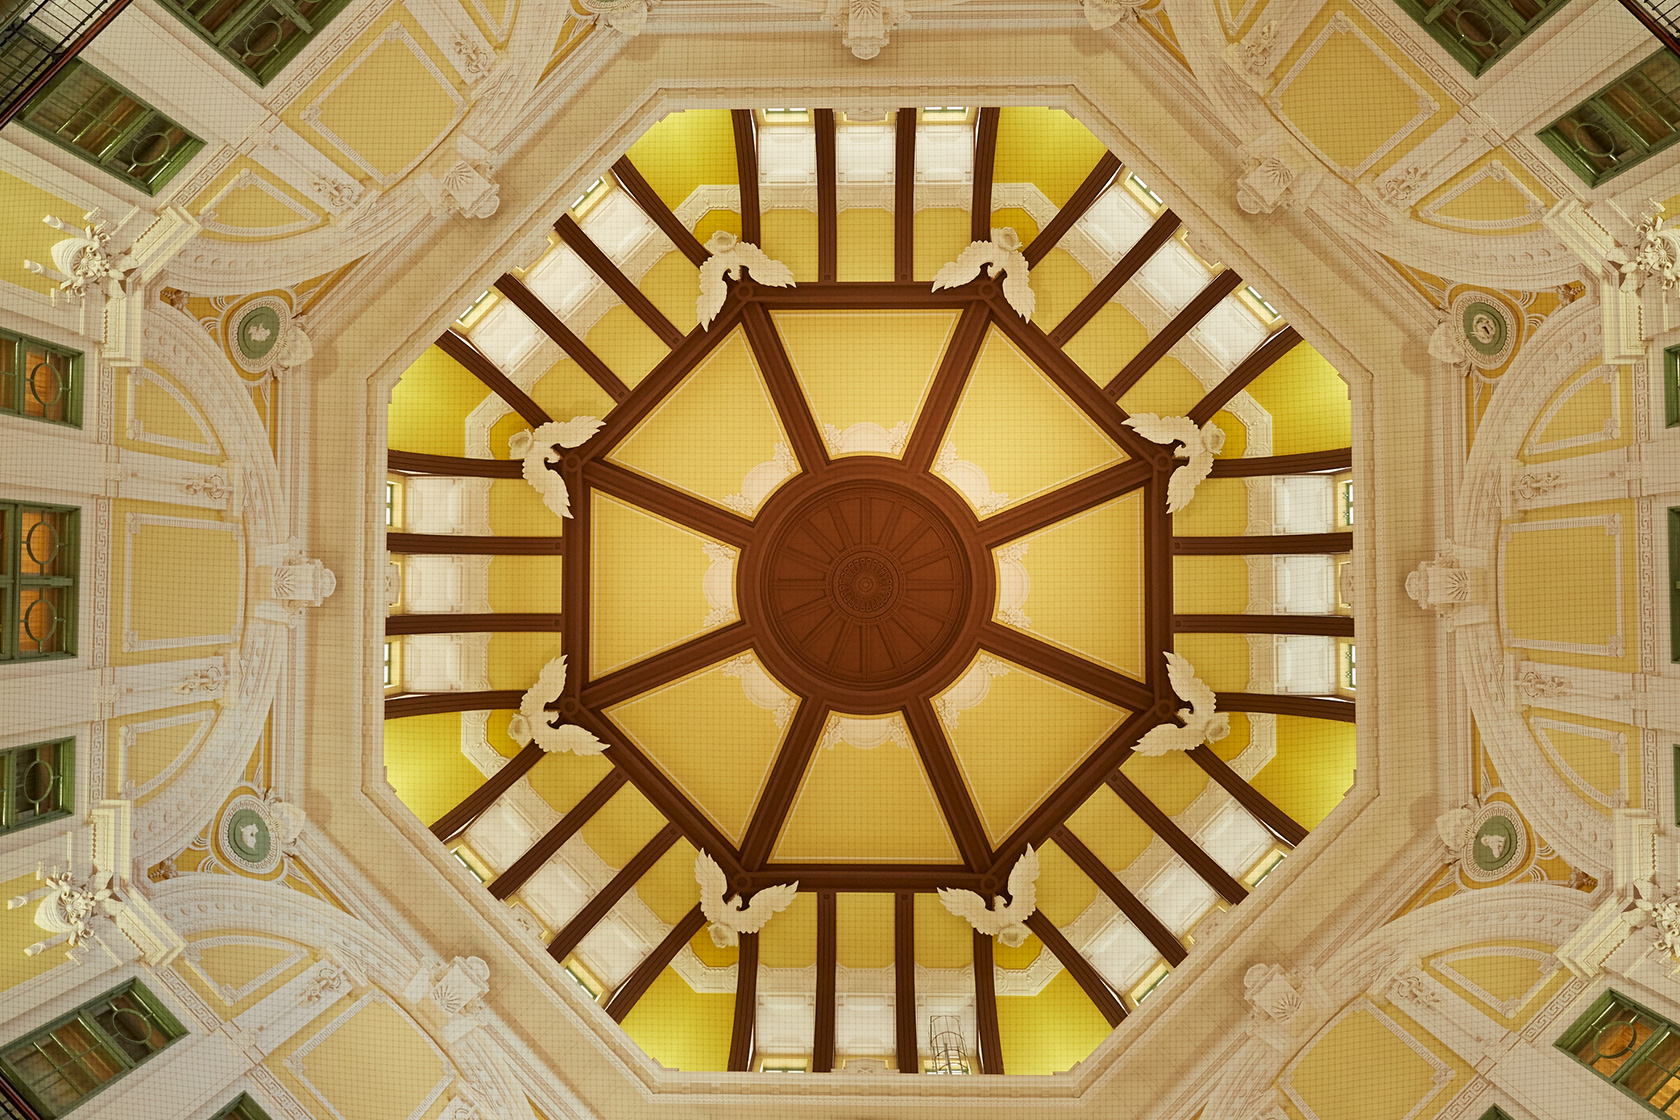 Dome ceiling after 2012